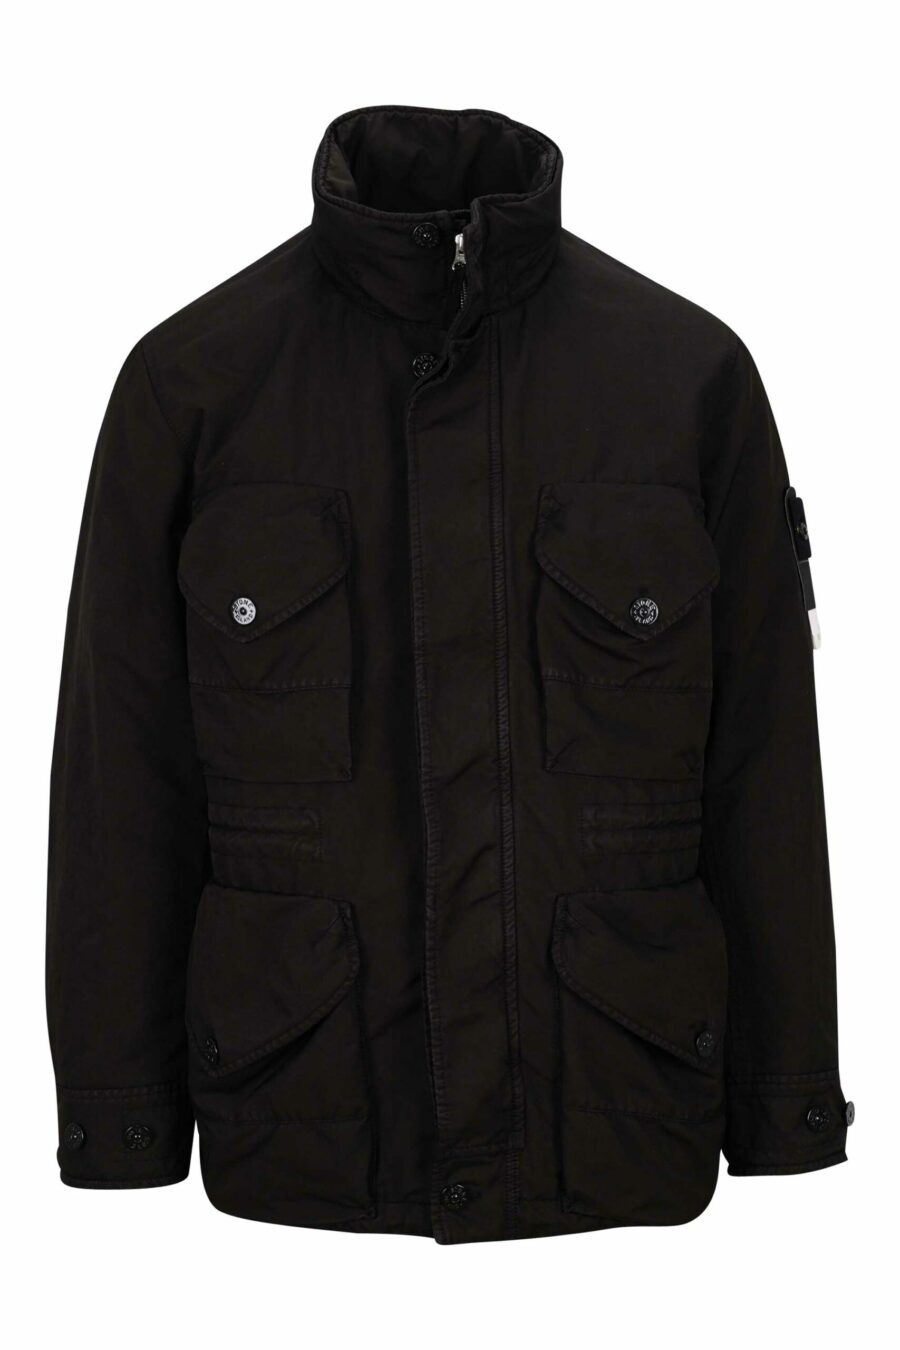 Black parka with pockets and logo patch on the side - 8052572794827 scaled